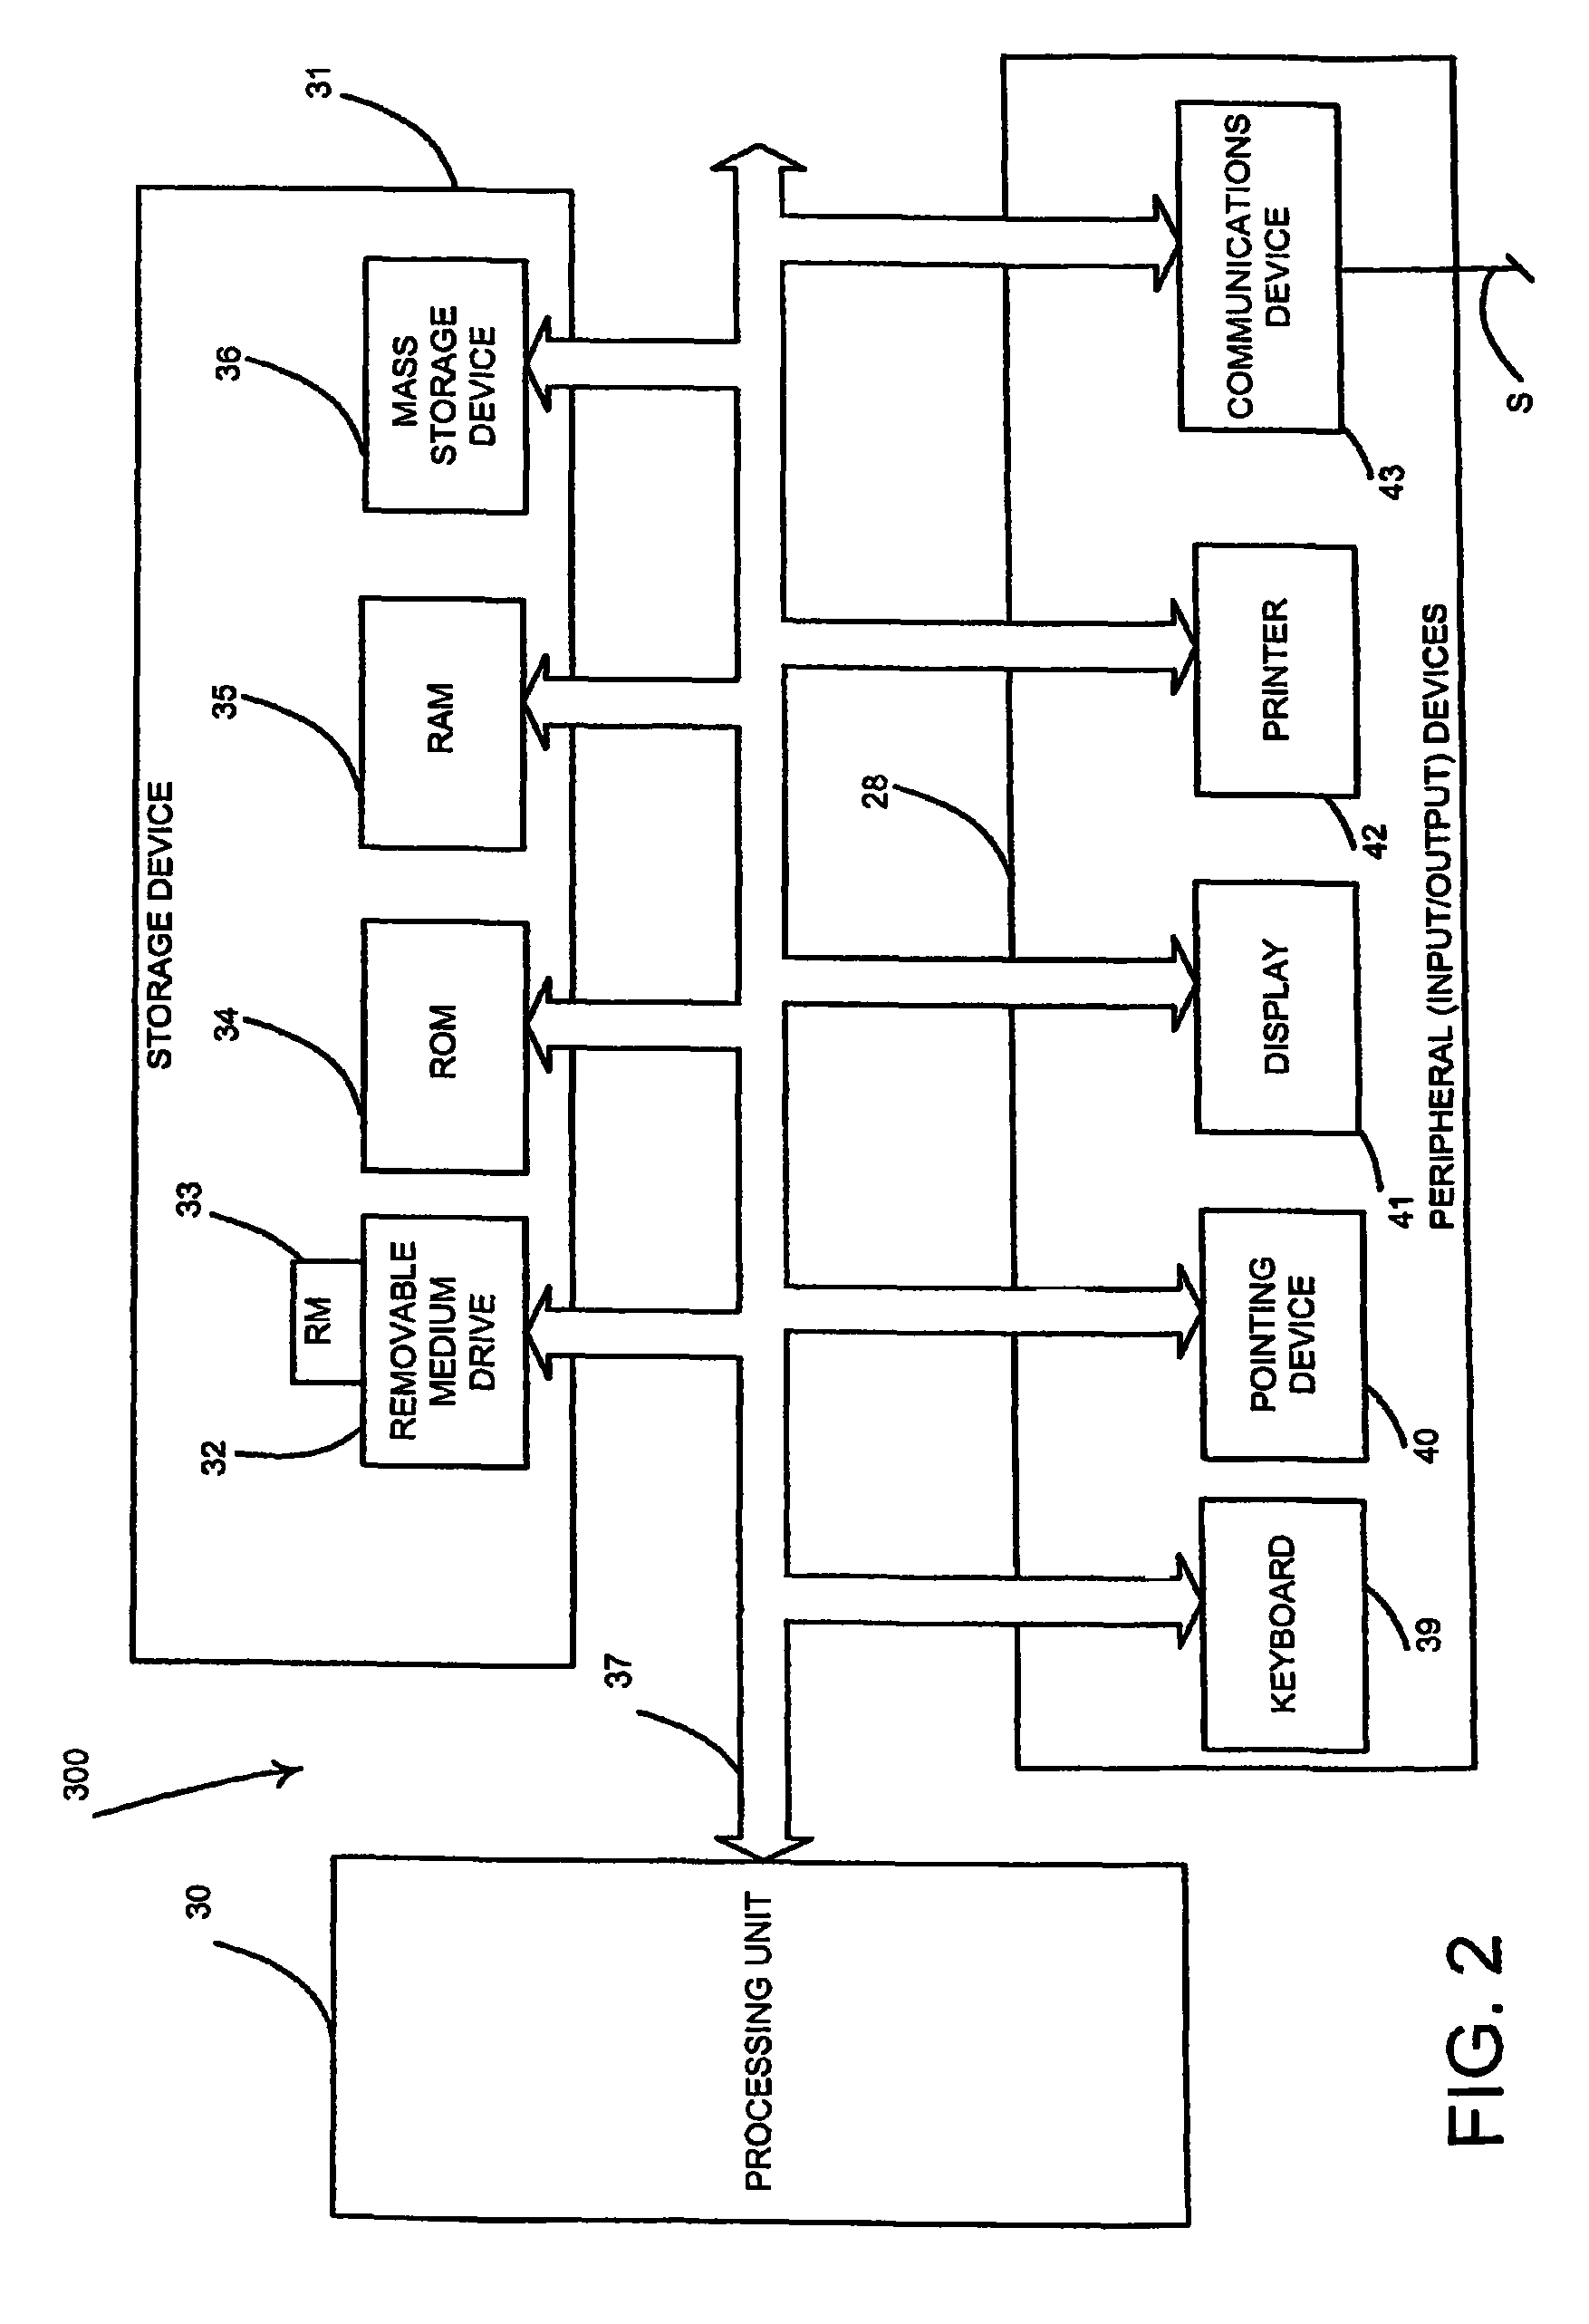 Apparatus for and a method of downloading media content